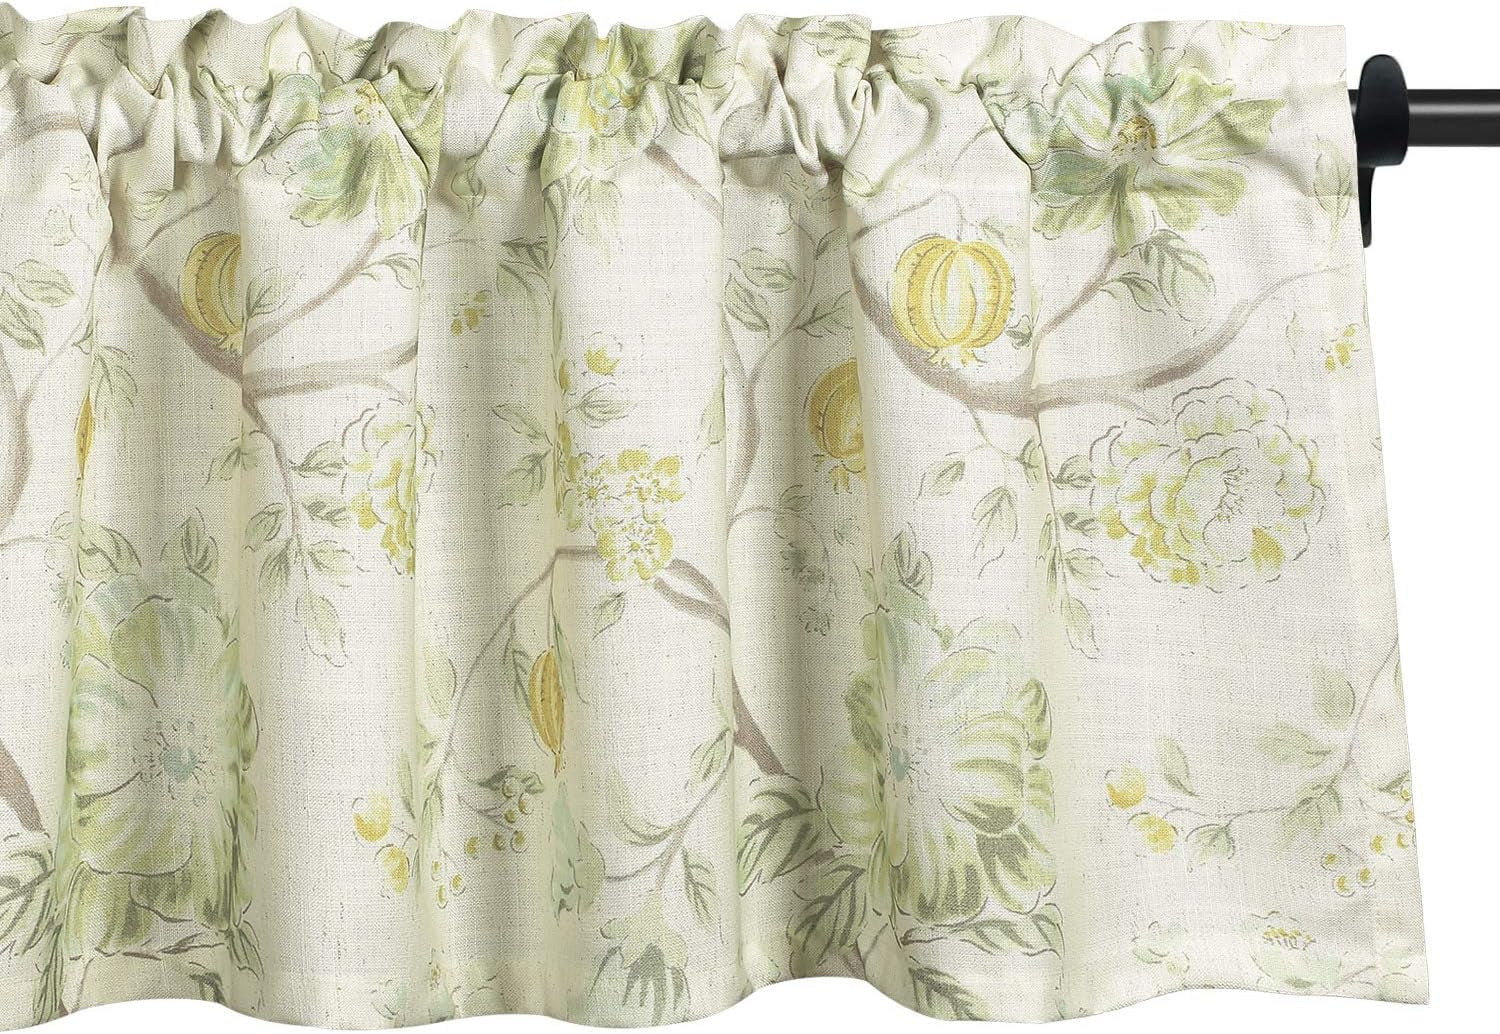 VOGOL Floral Printed Curtain Valance, Fresh Blossoms Small Curtains for Living Room, Rod Pocket Modern Window Valances for Dining Room, One Panel, 52X18, Green